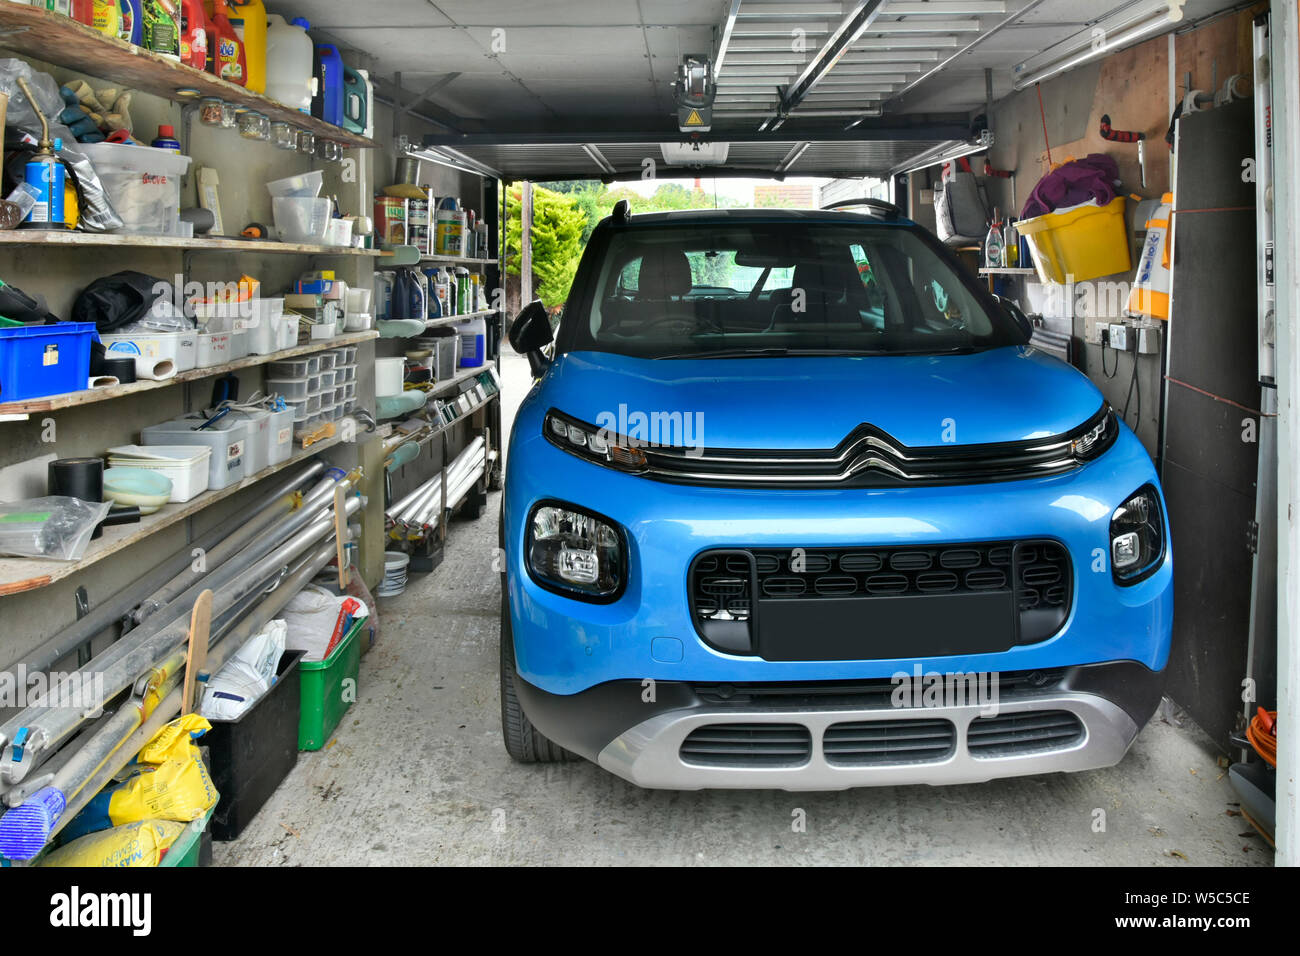 Citroen Aircross car parked in attached to house residential property garage  shelving for storage sundry household paraphernalia & tools  England UK Stock Photo